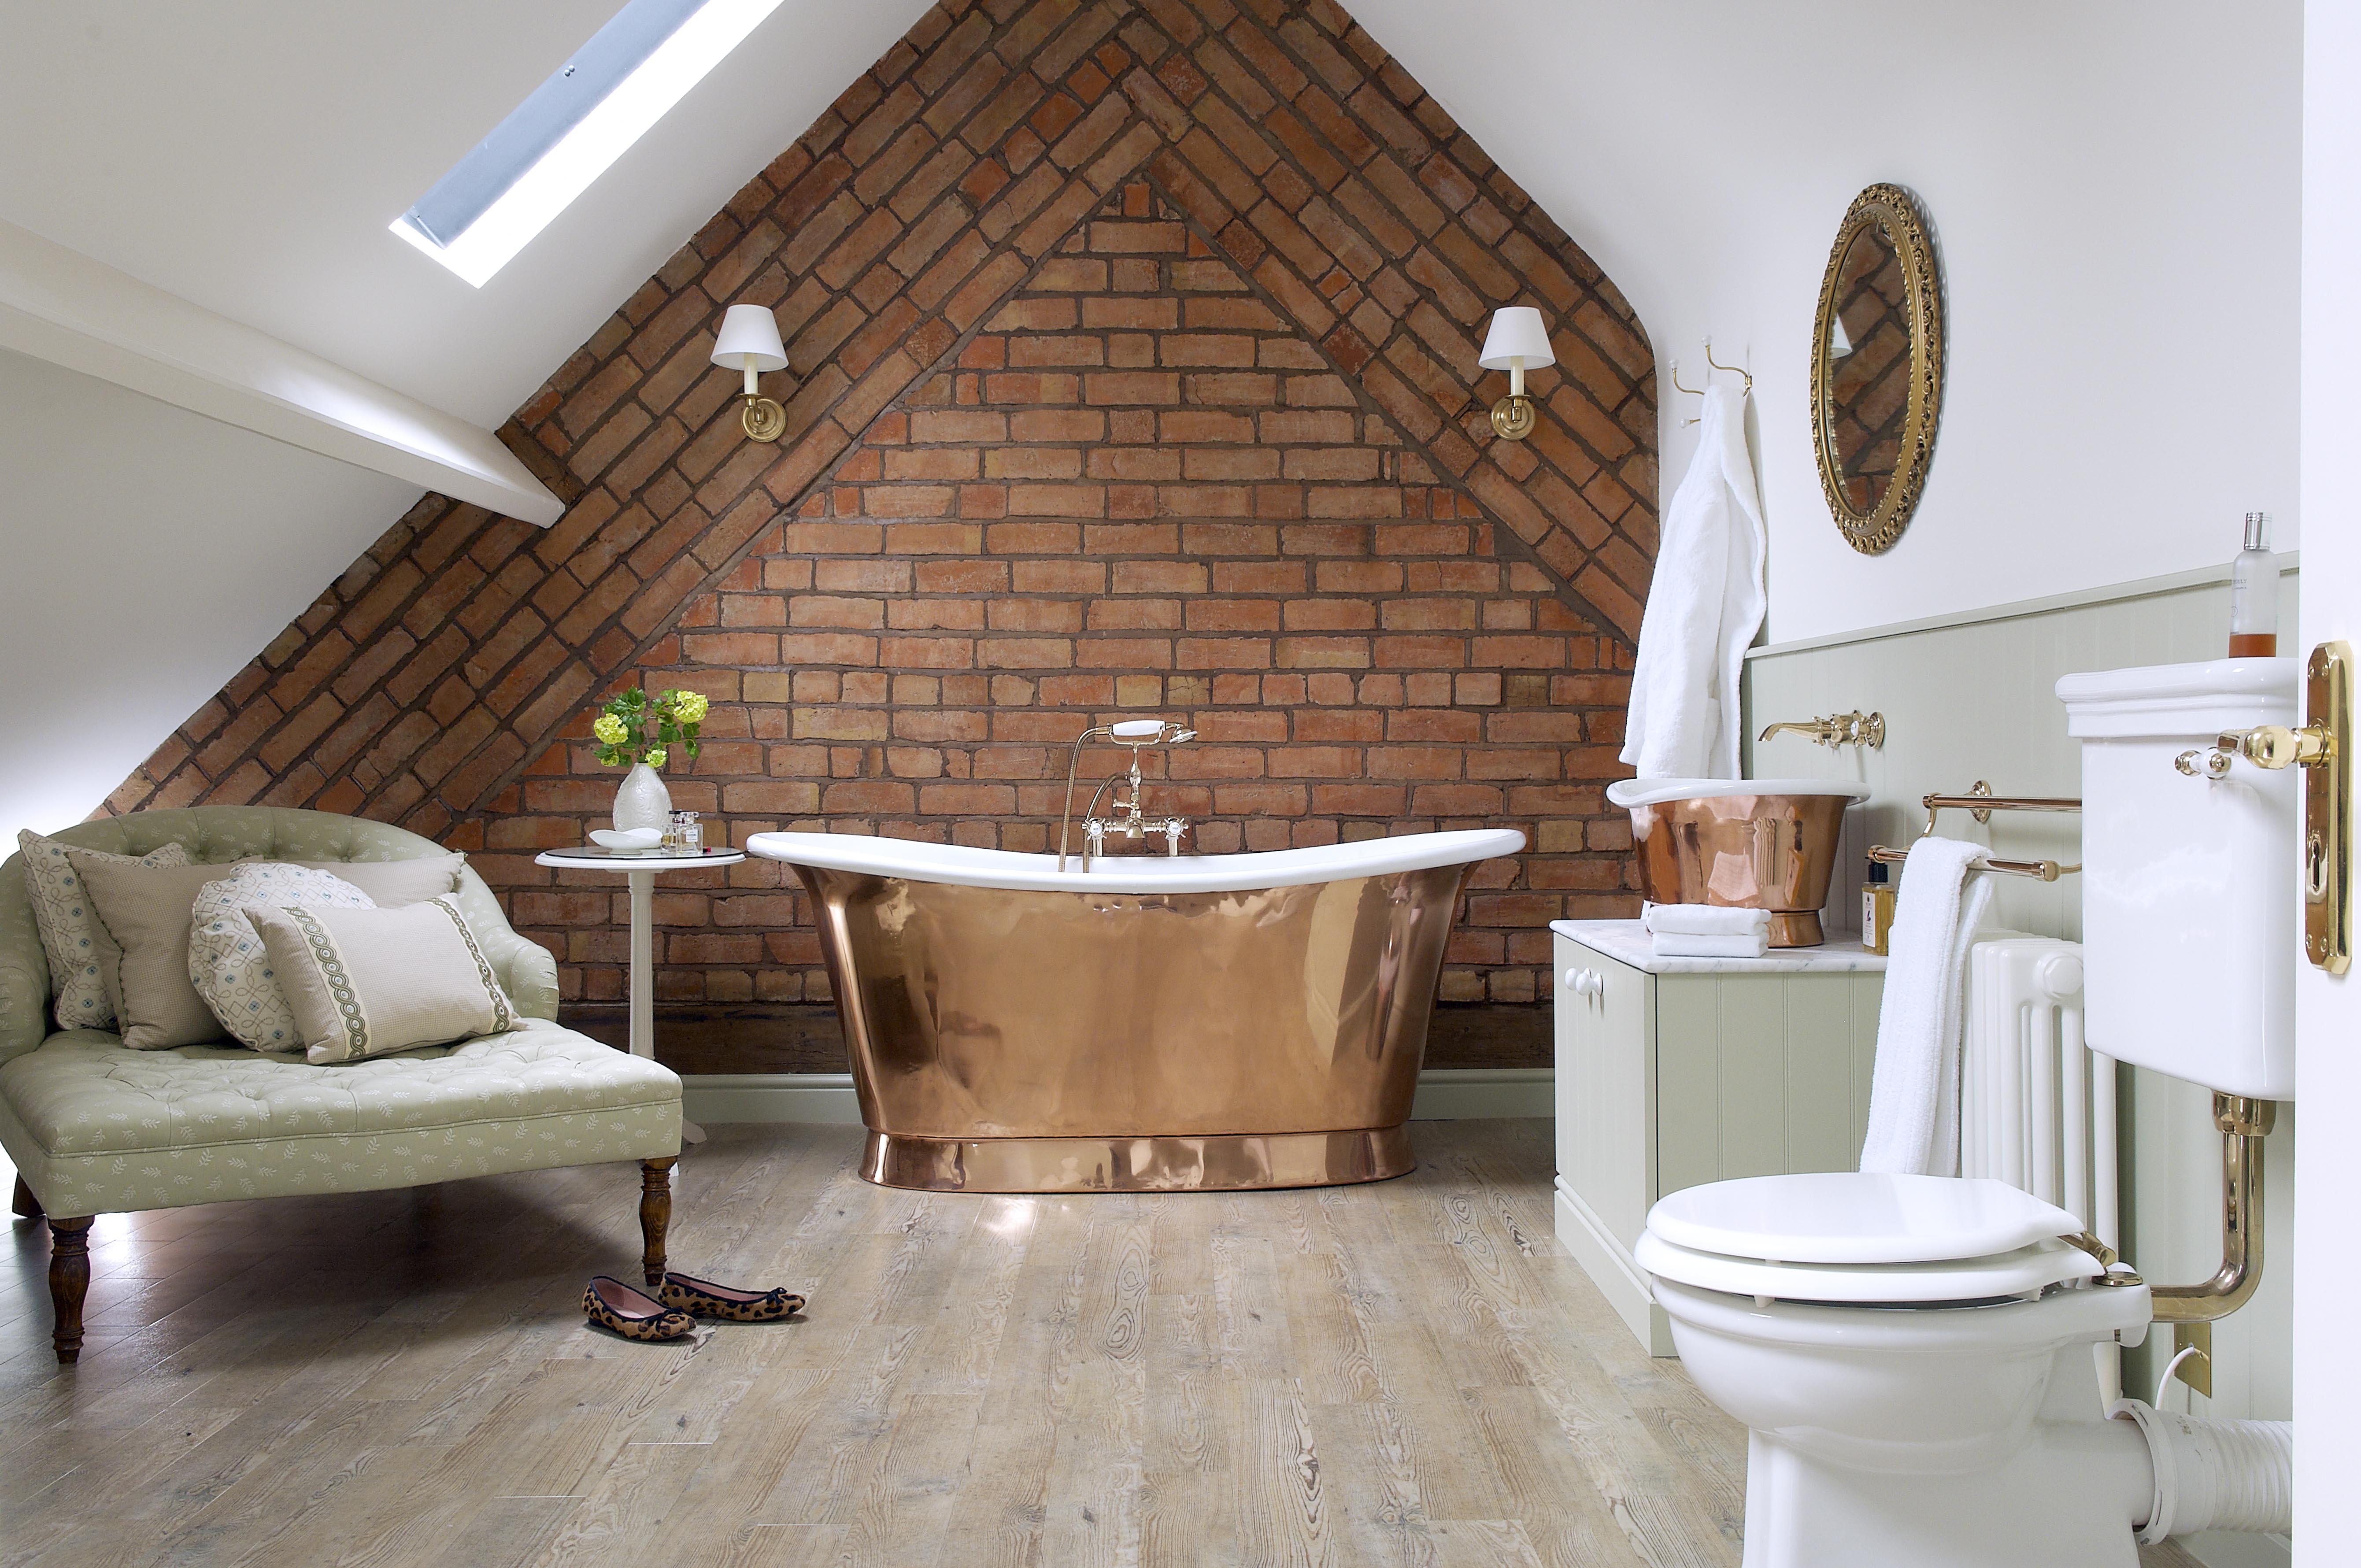 We created this en-suite bathroom in what was previously unused loft space, the copper bath providing a practical but stunning focal point